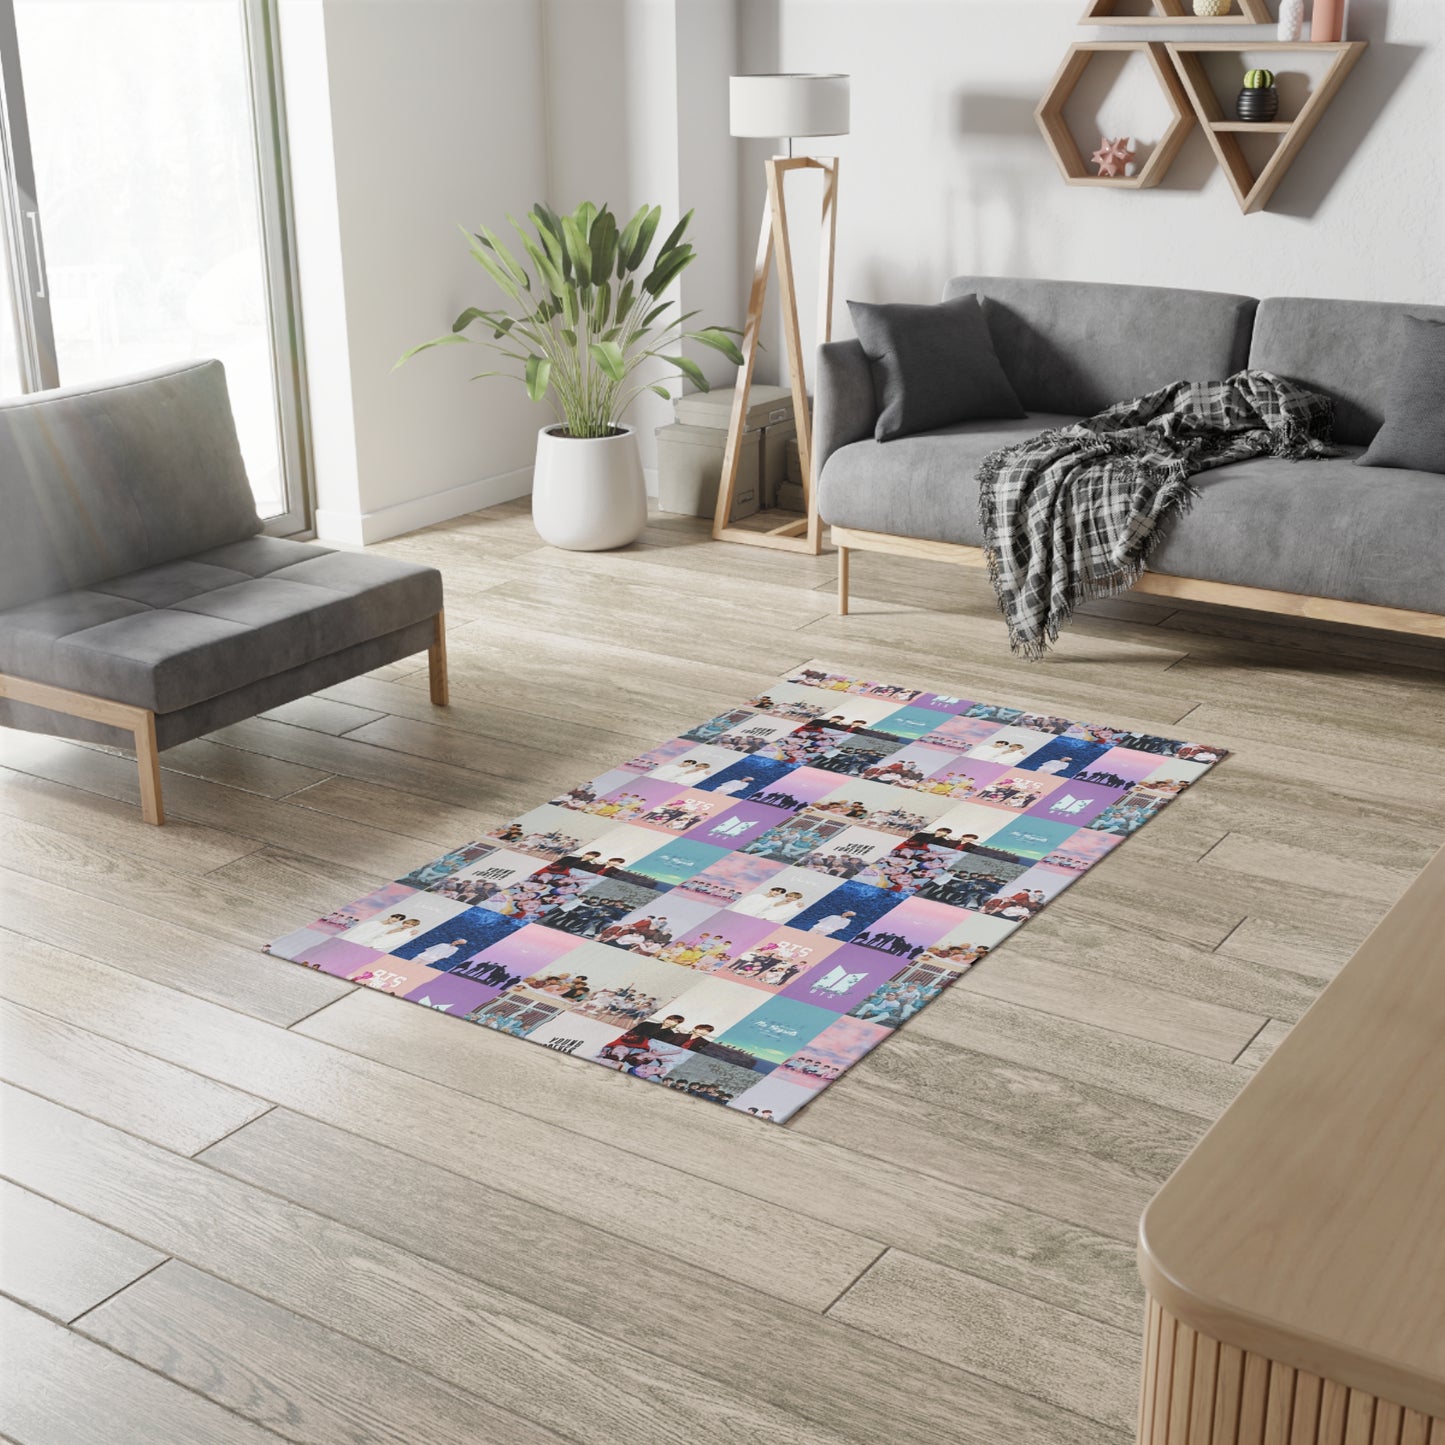 BTS Pastel Aesthetic Collage Dobby Rug